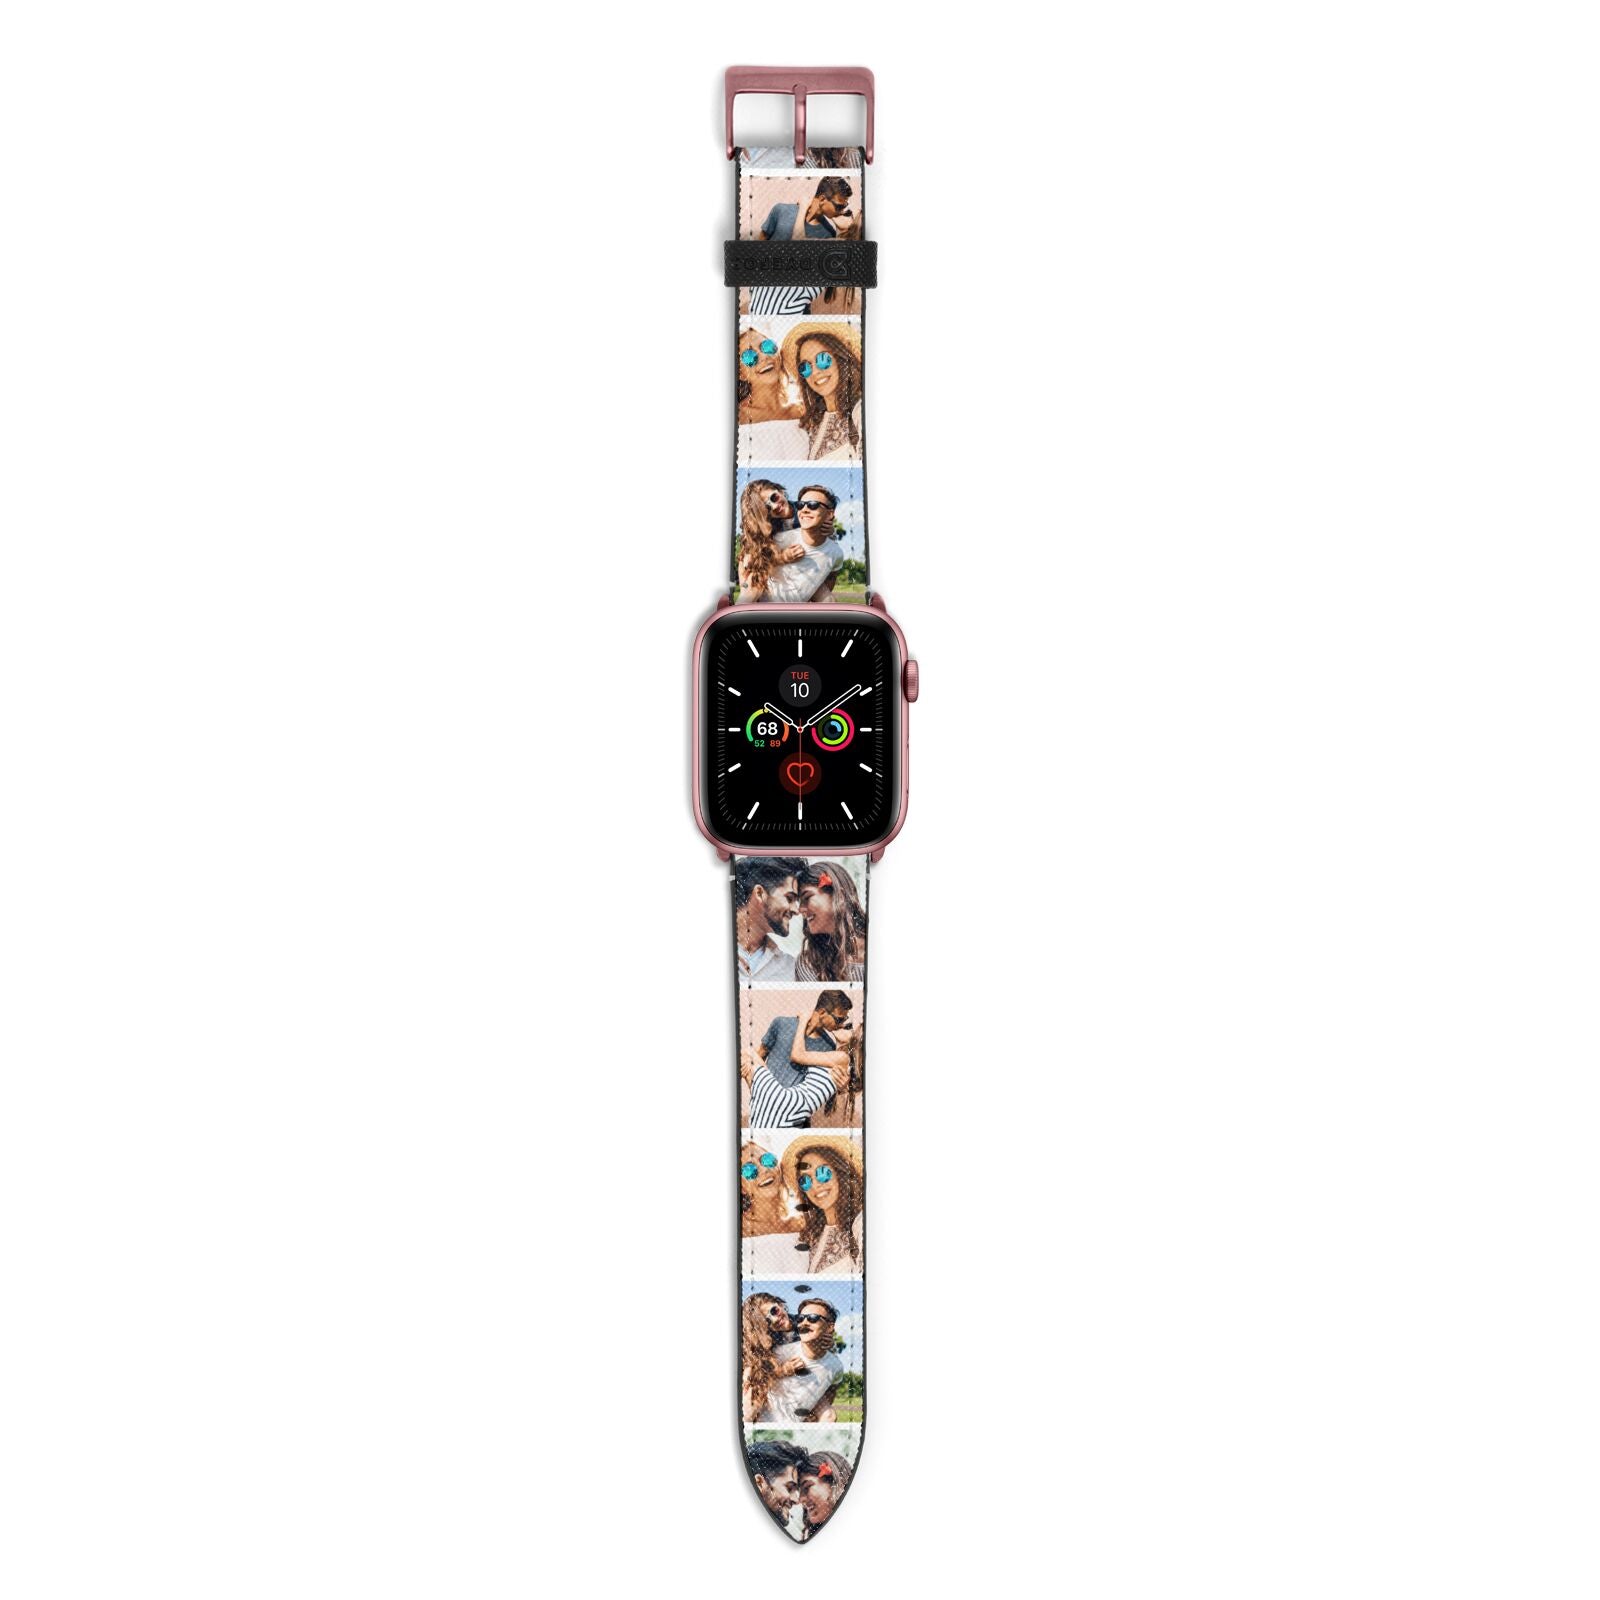 Photo Strip Montage Upload Apple Watch Strap with Rose Gold Hardware